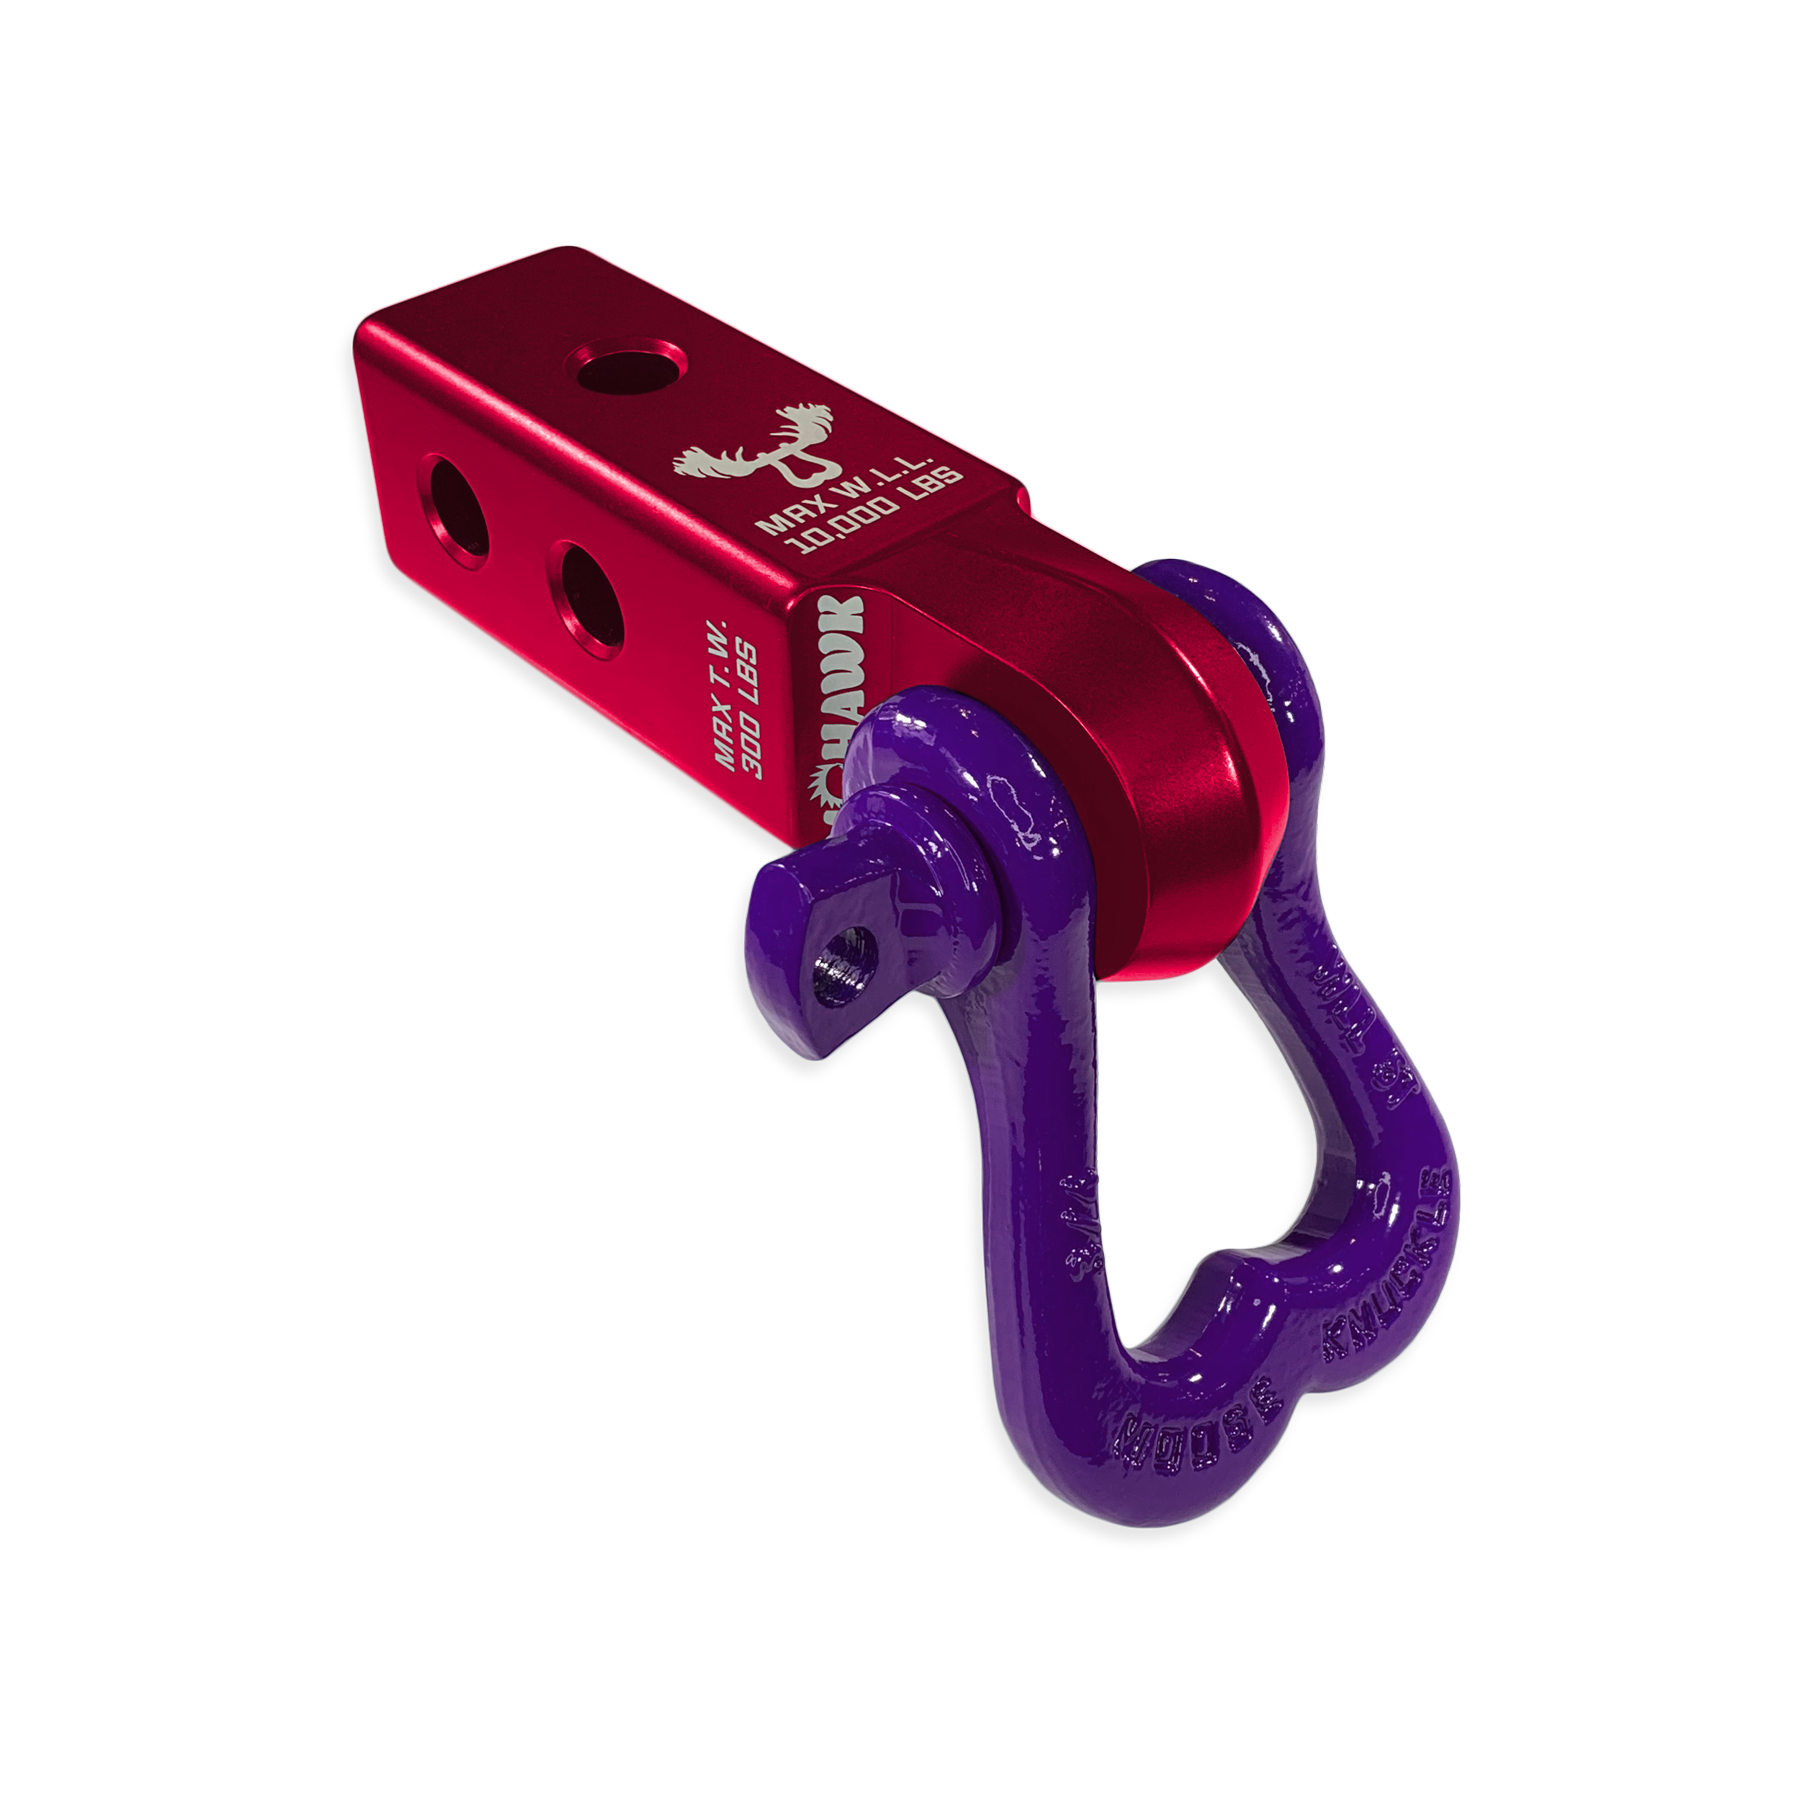 Moose Knuckle Offroad XL Grape Escape Purple D-Ring Shackle and Red Rum Mohawk 2.0 Shackle Receiver Combo for off-road vehicle recovery and towing. 